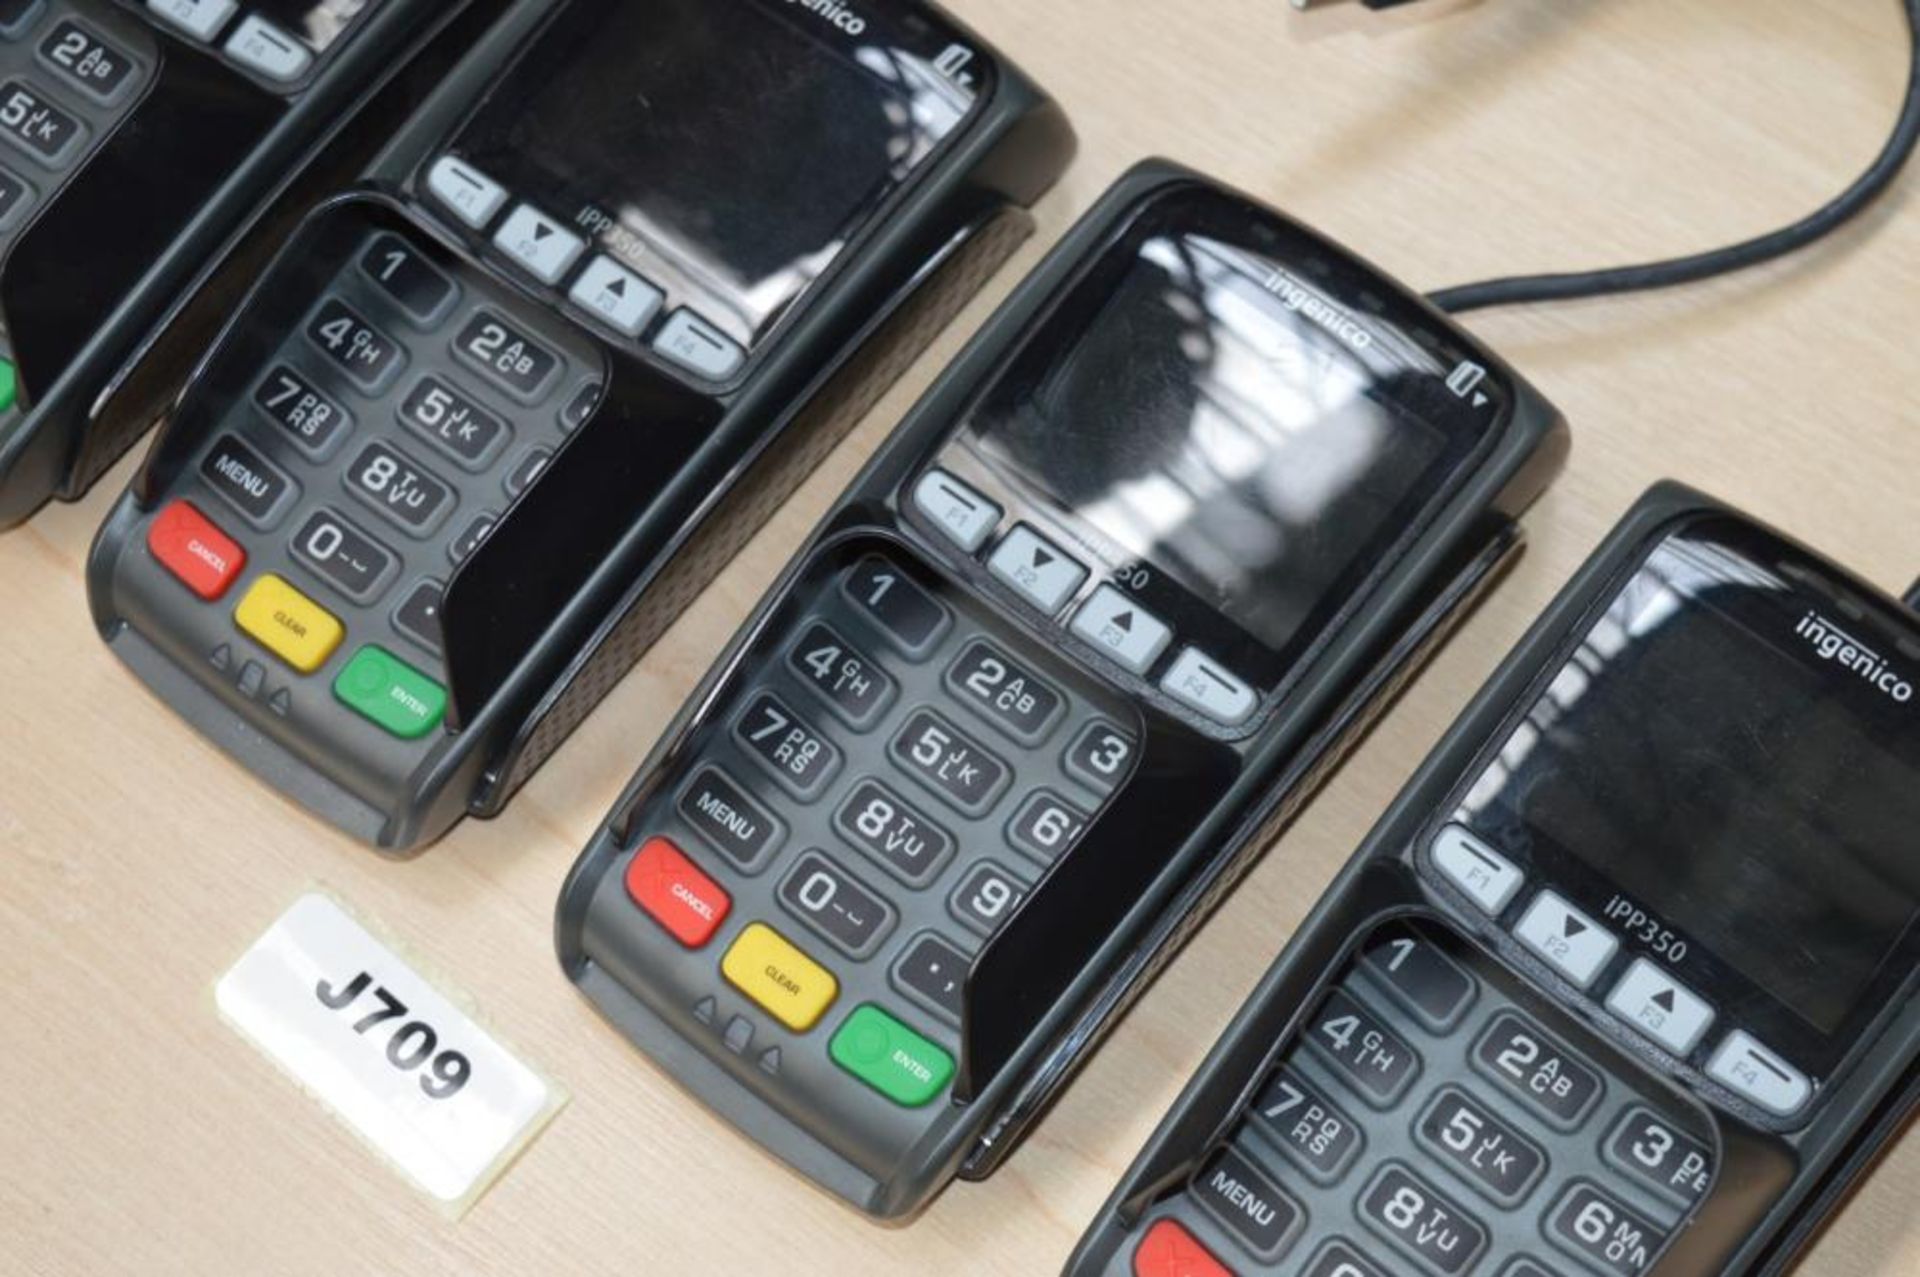 4 x Ingenico iPP350 Payment Terminal Devices - Removed From Working Environments in Good Condition a - Image 3 of 4